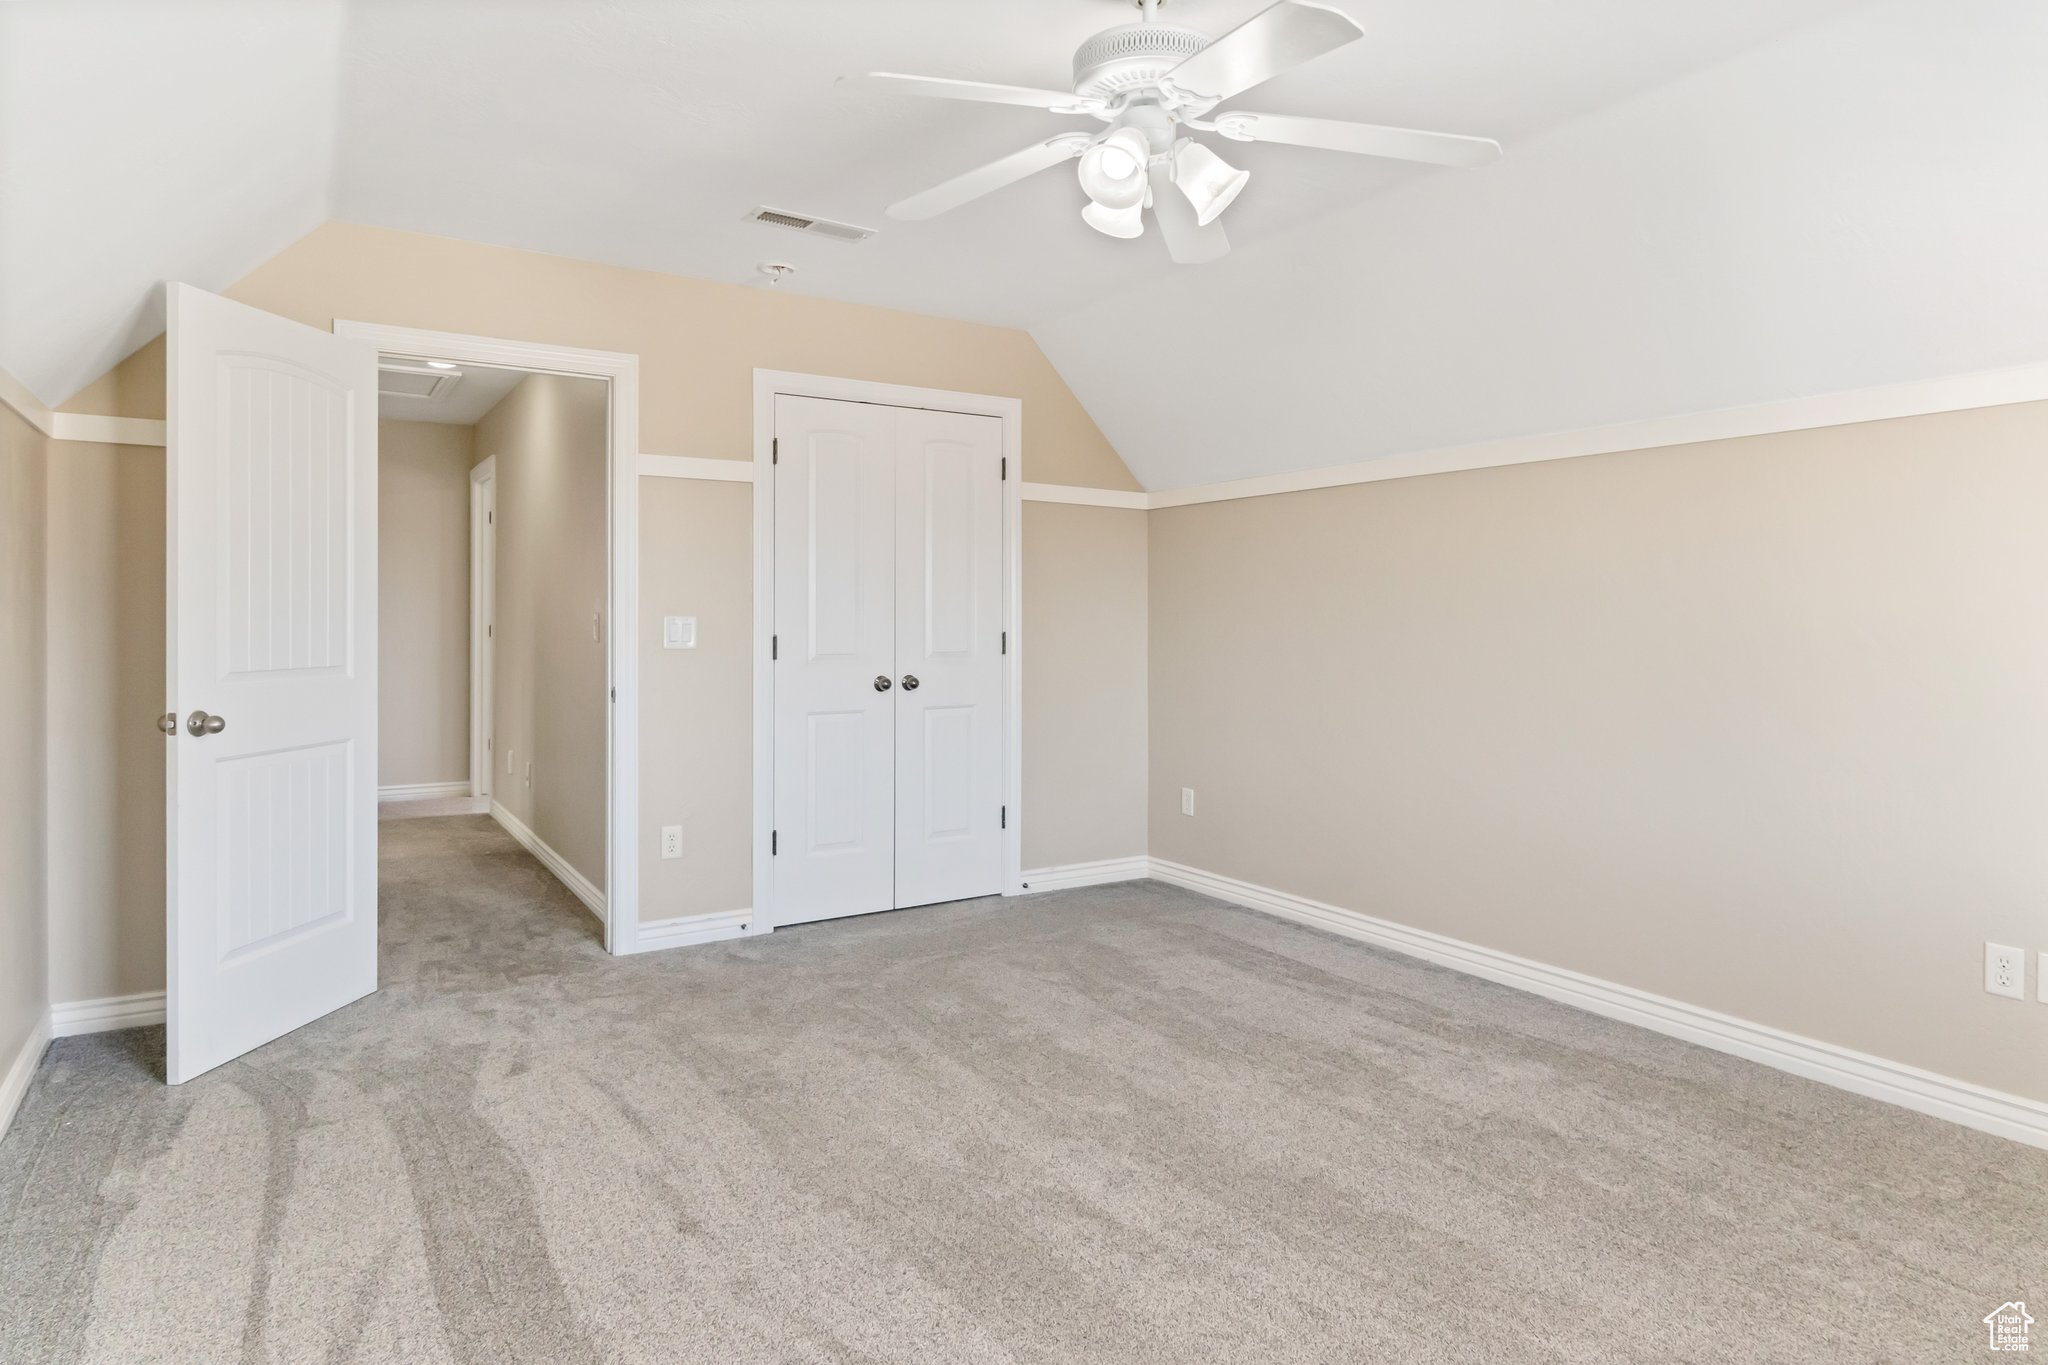 Additional living space featuring light colored carpet, lofted ceiling, and ceiling fan